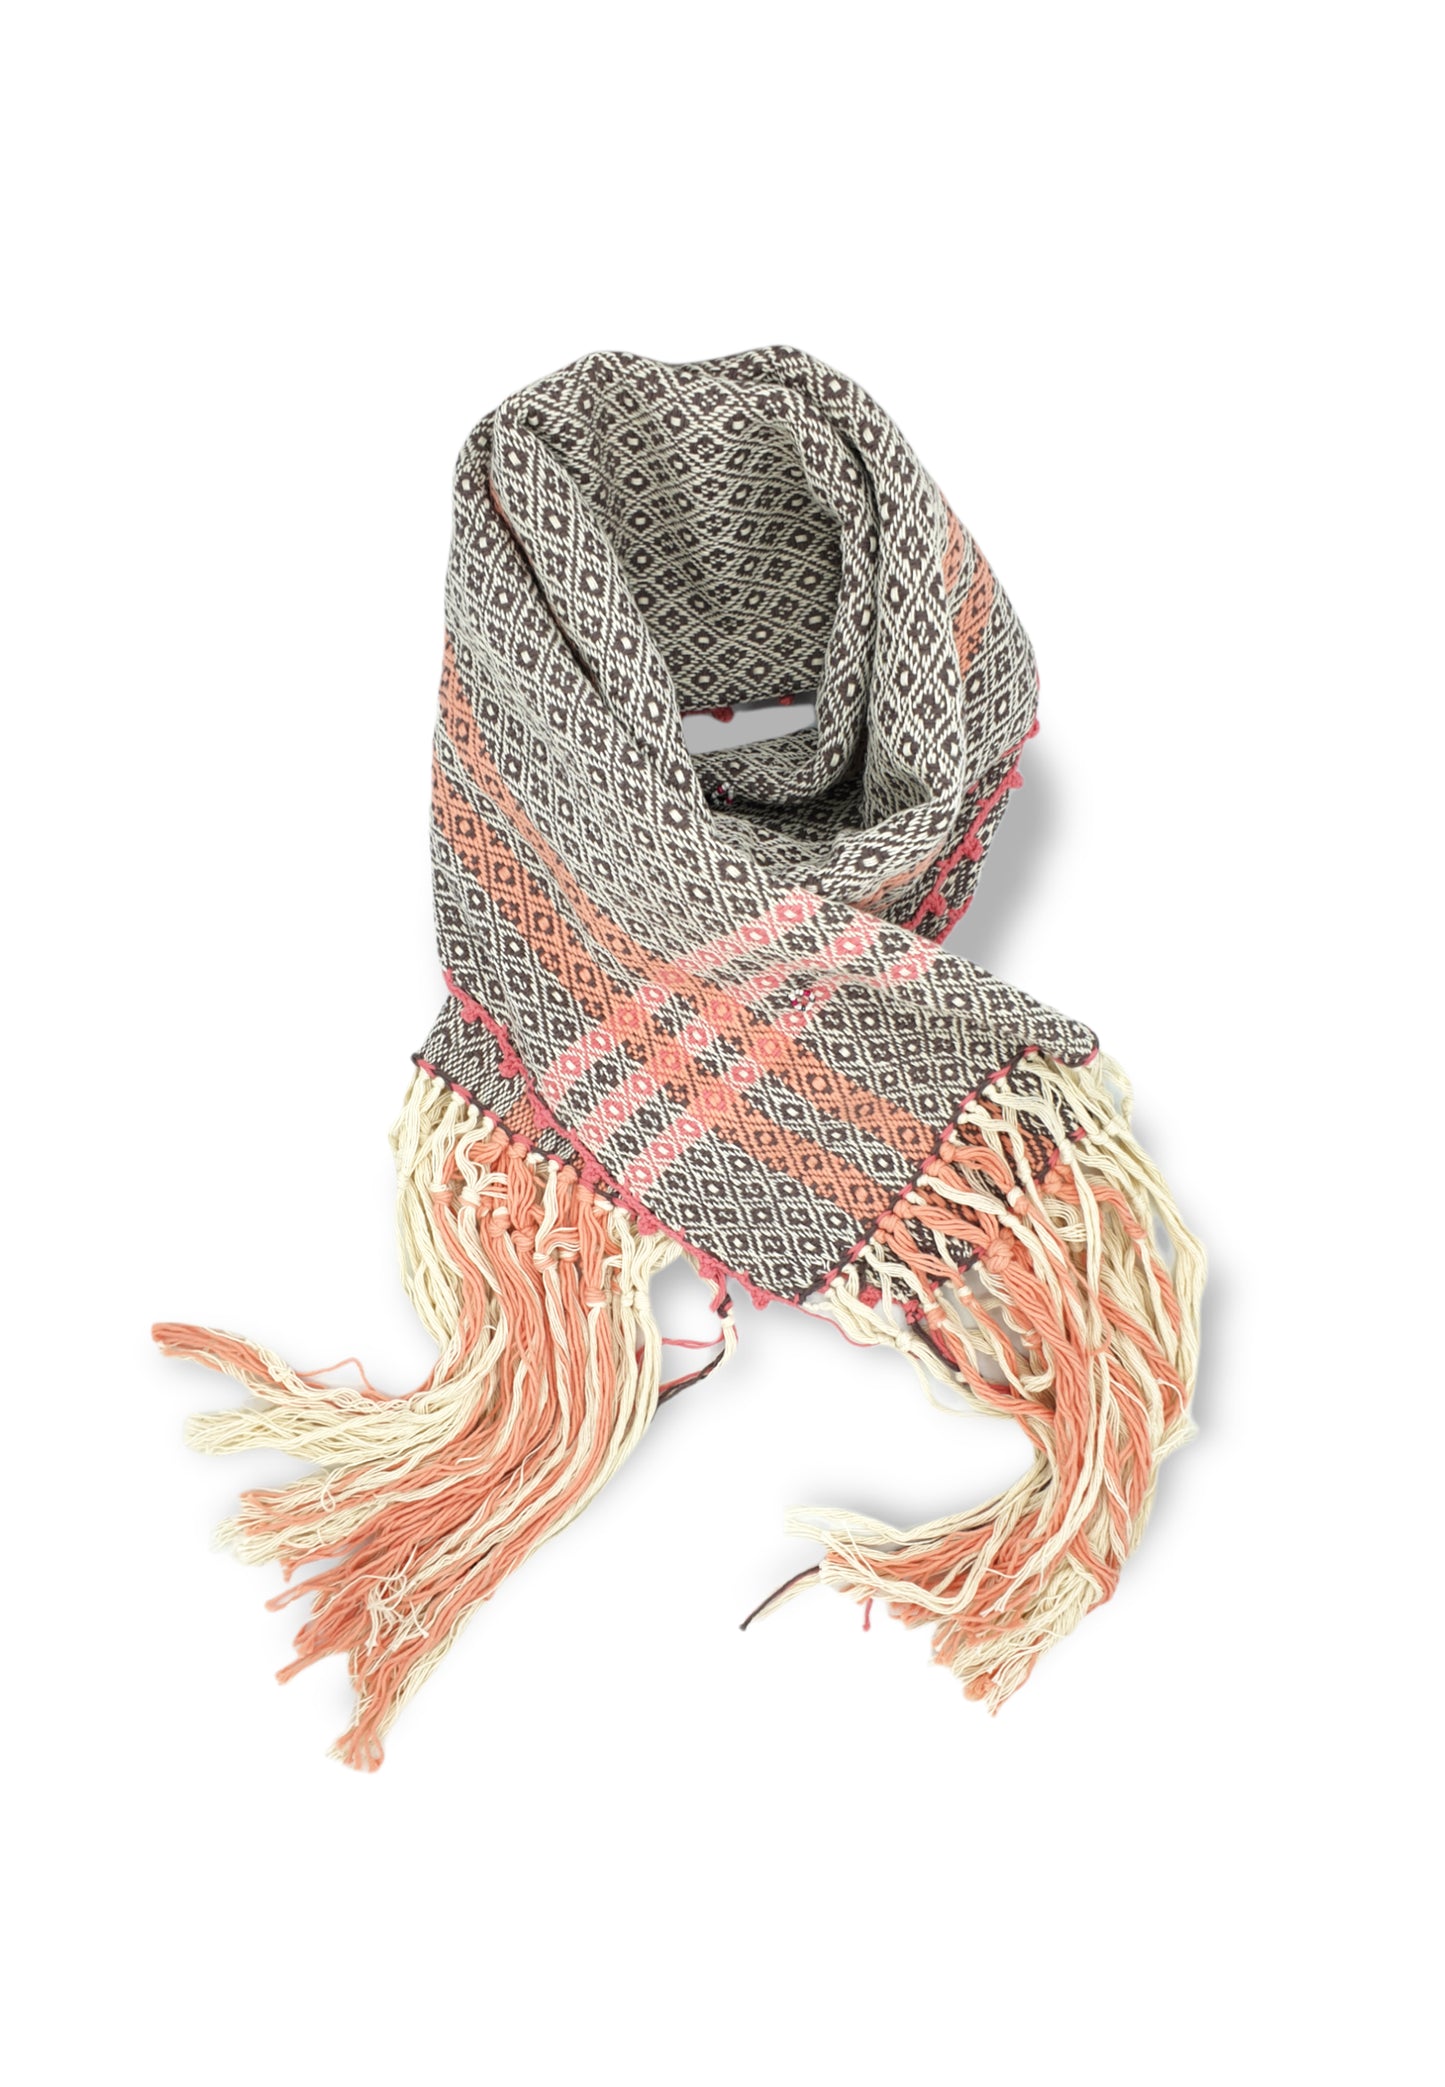 AFROZAN Hand-woven Cotton Scarf - AC01